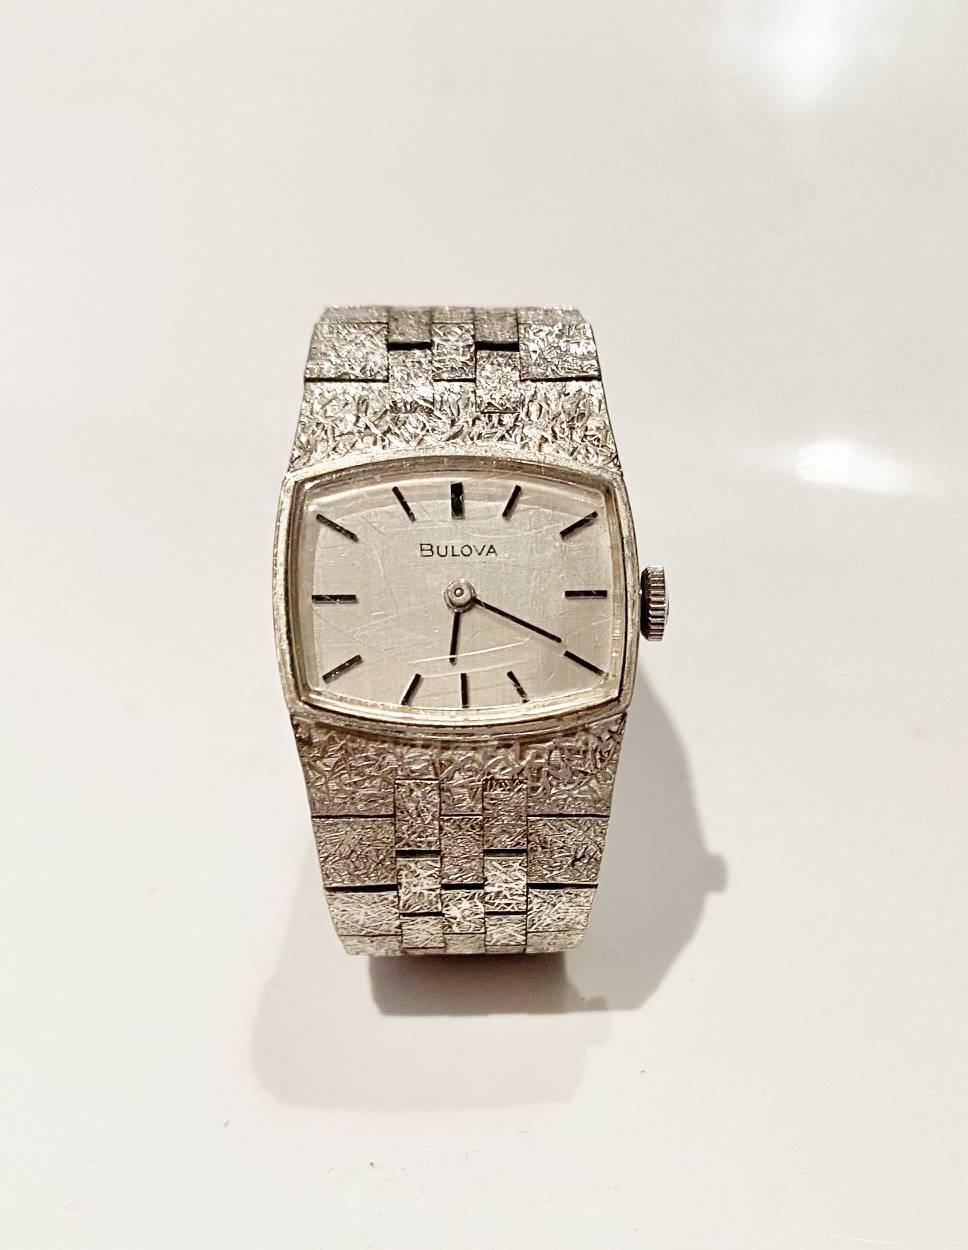 A testimony of the 1970s, Bulova 17 jewels dress watch, silver tone mesh metal, original box 

Condition: 1970s, vintage, very good, some sign of wear on glass as shown in pictures 

Strap length: approximately 20cm/7.8in long 

Features:

Strap